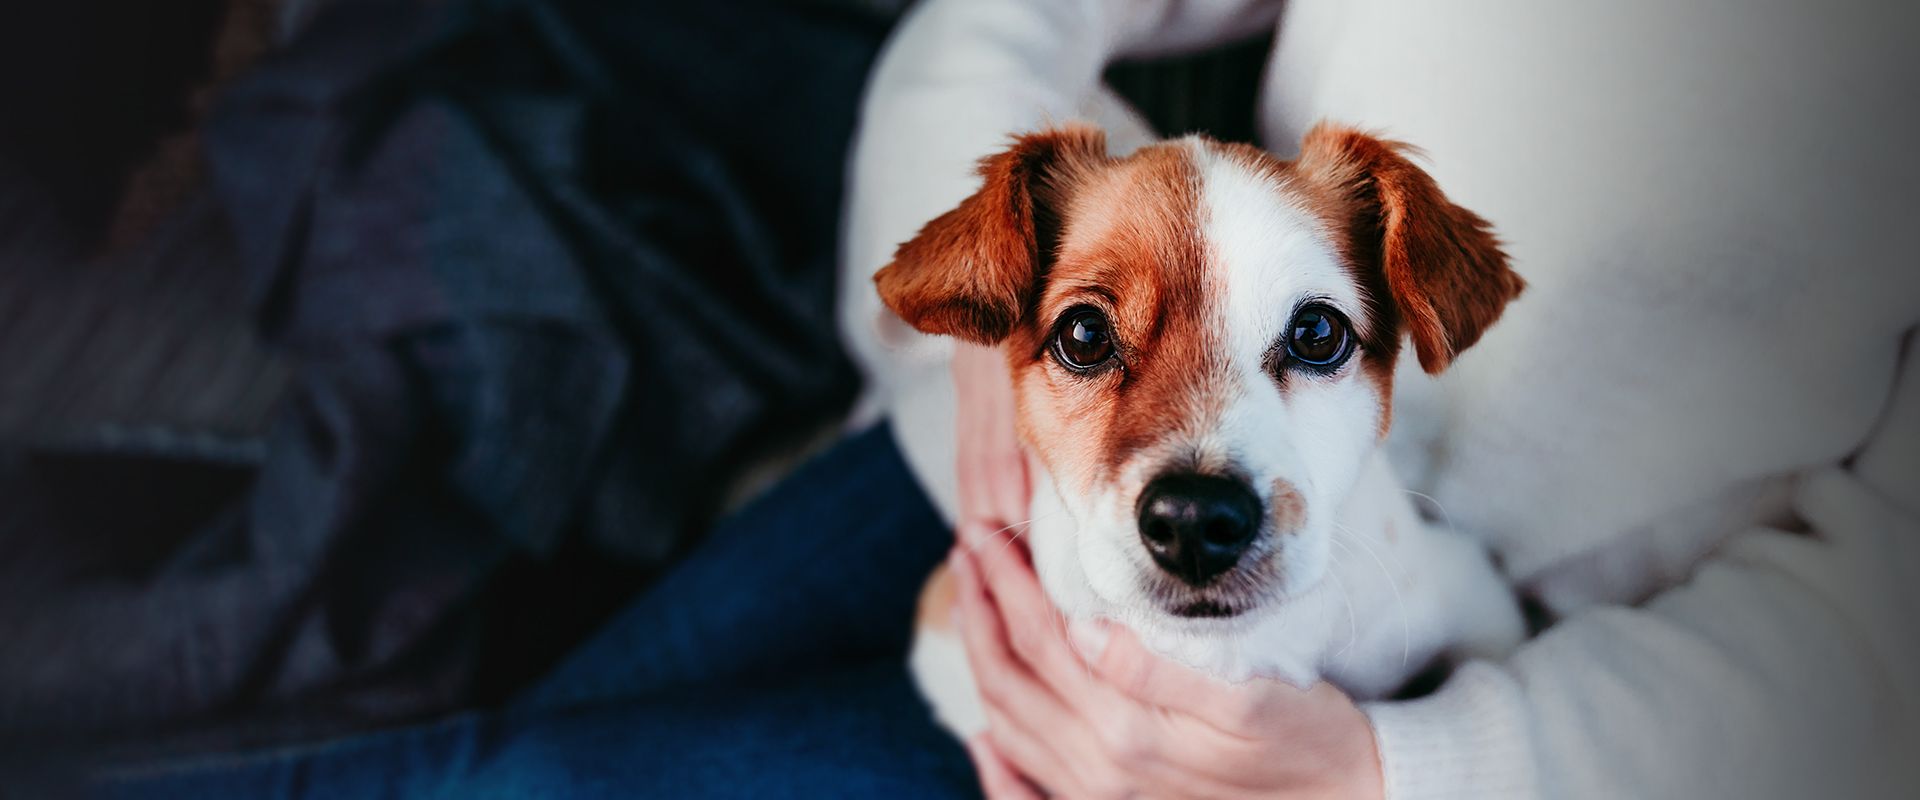 jack russell dog in the arms of his owner